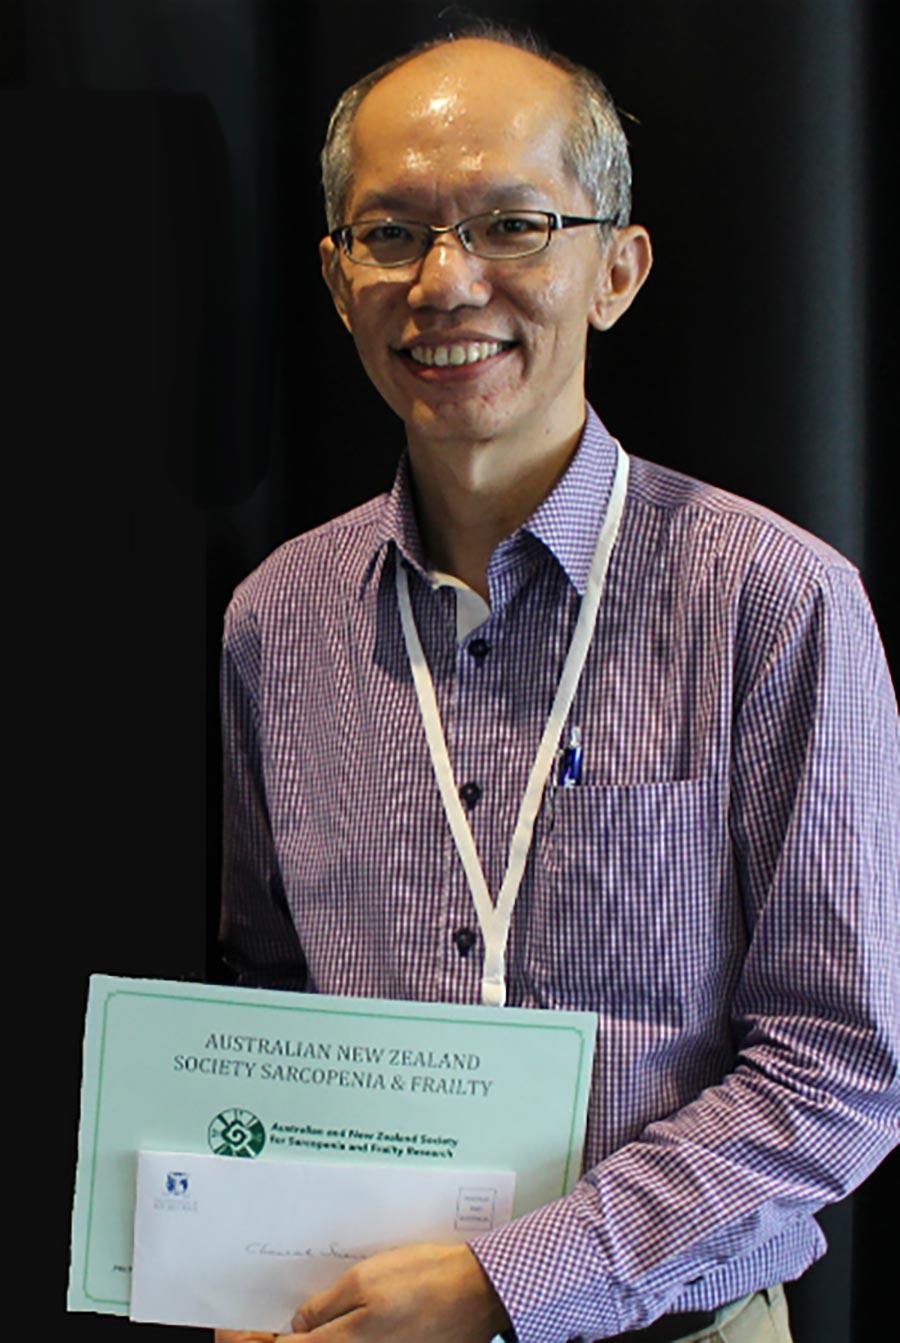 A/Prof Wee Shiong Lim